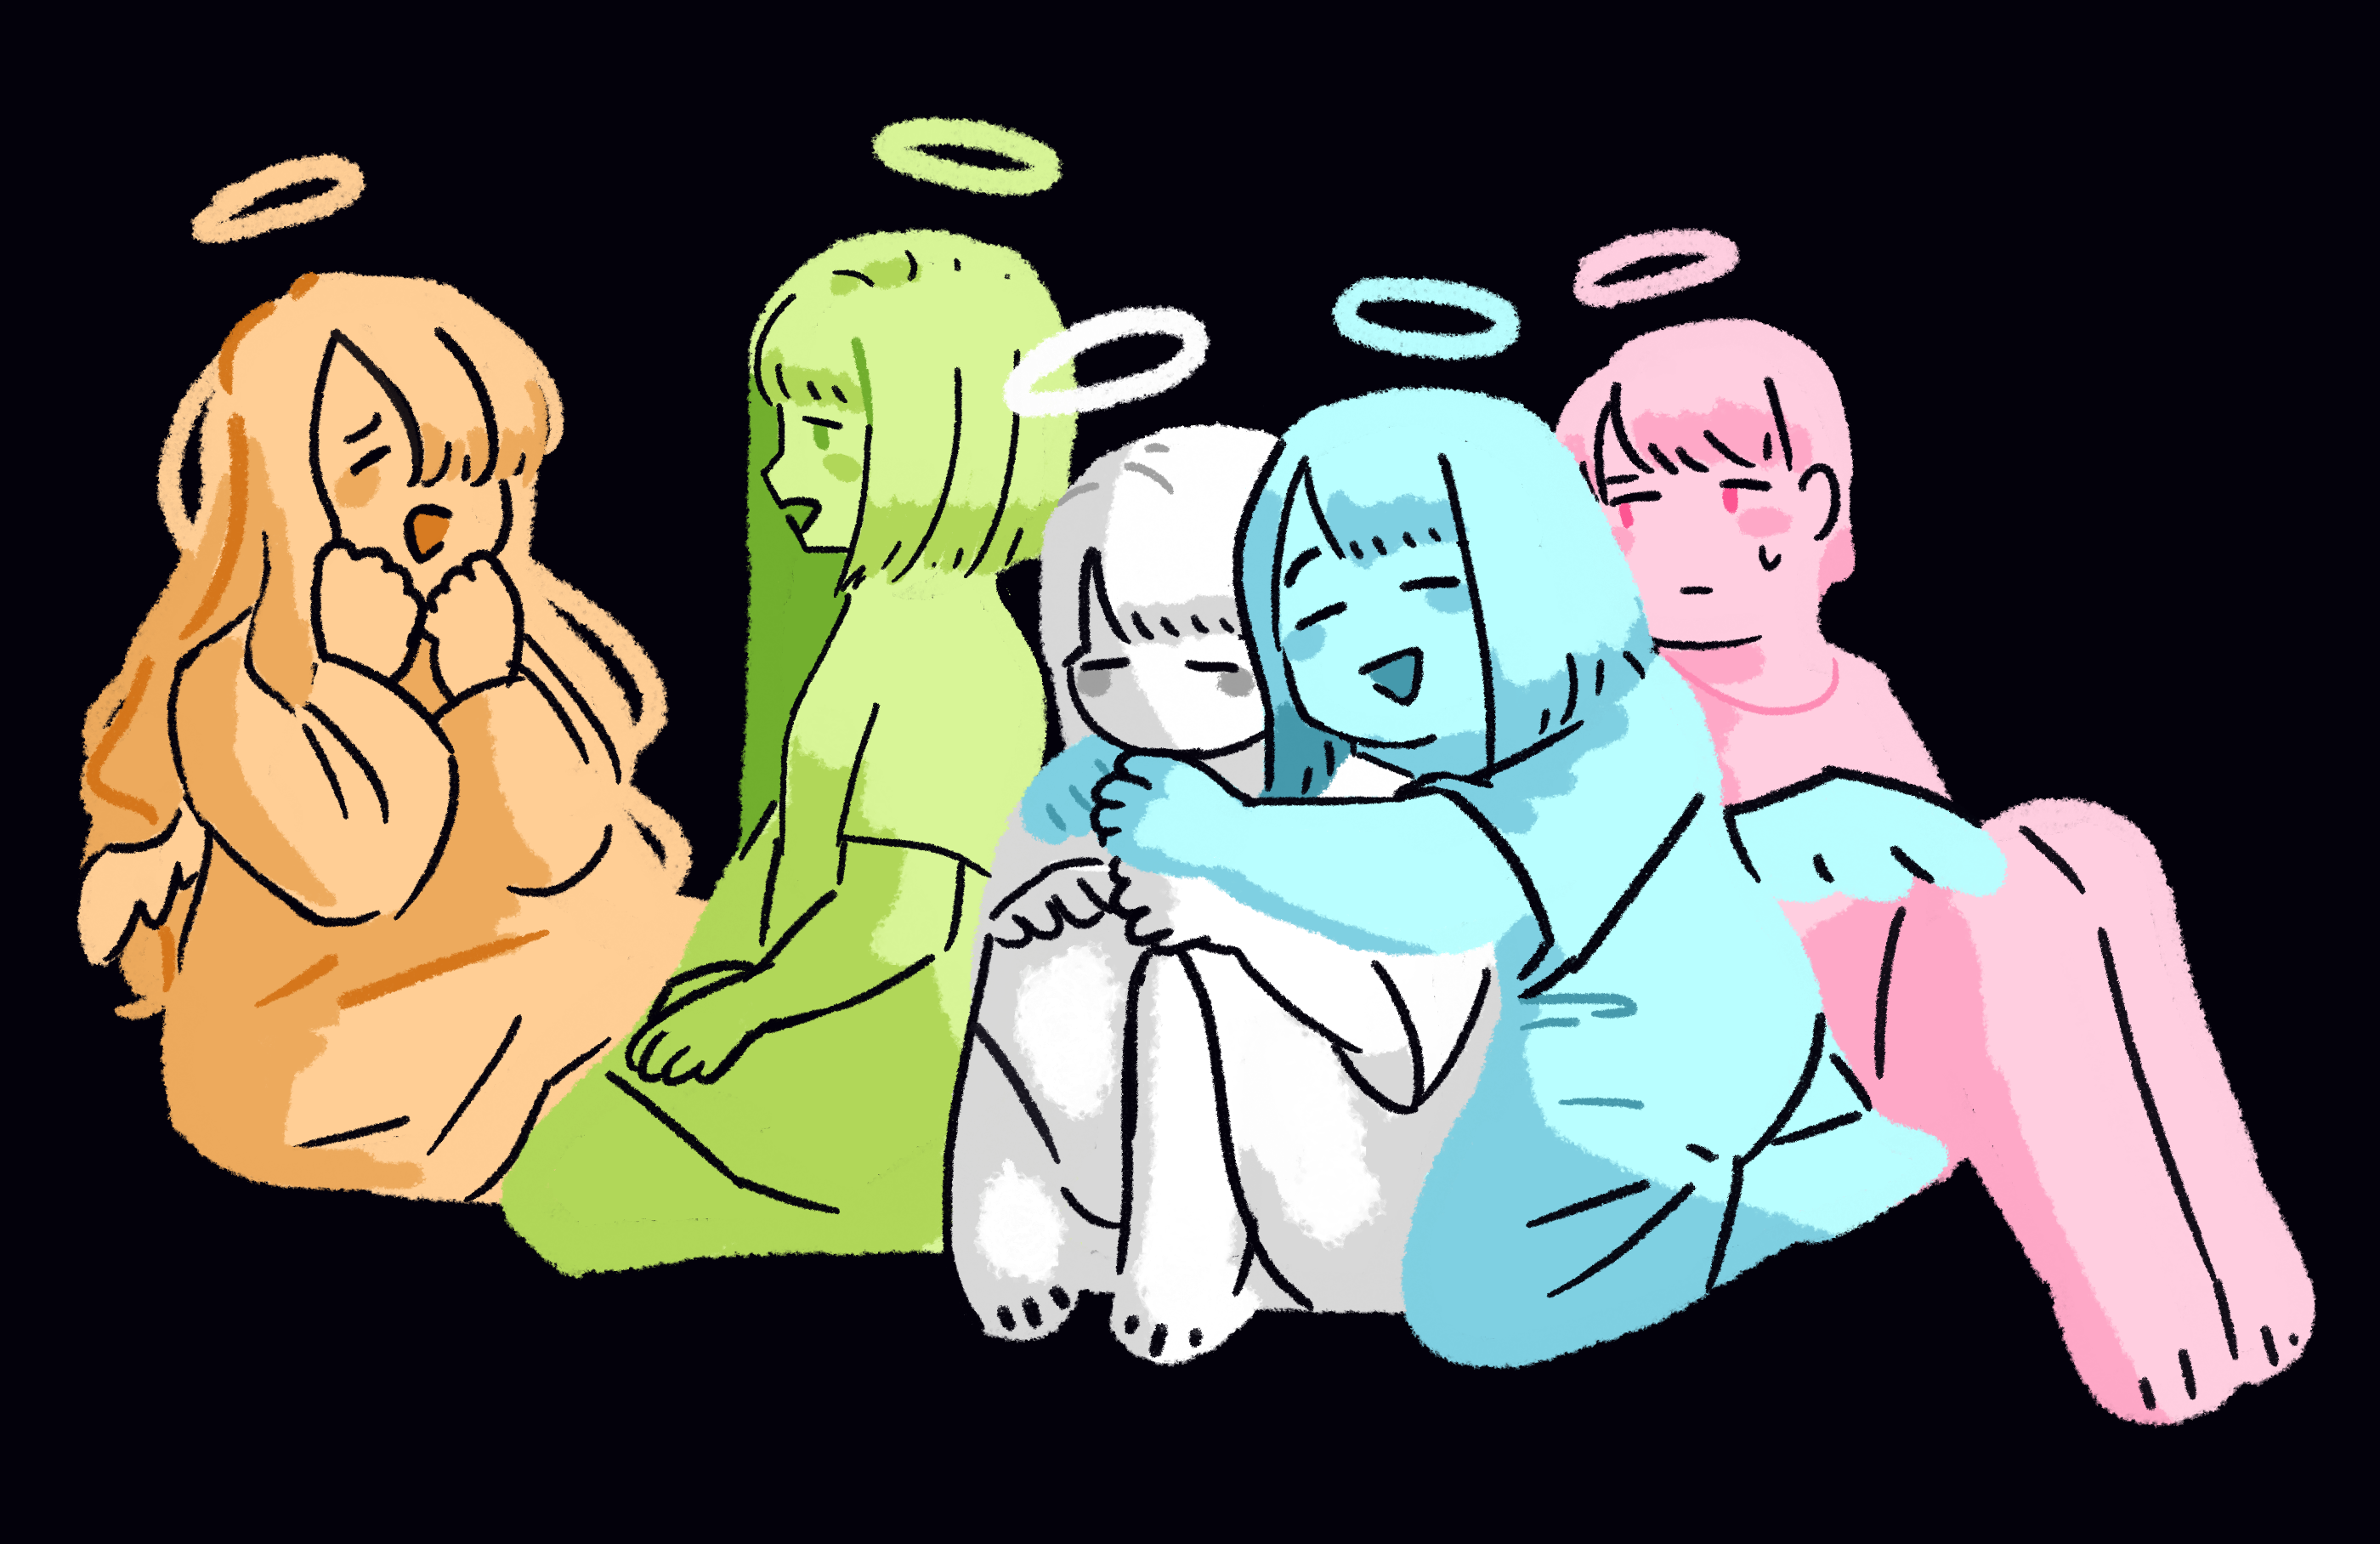 A doodle of angels named Community (orange), Reconciliation (green), Hope (white), Maturity (blue), and Regret (pink) sitting together.